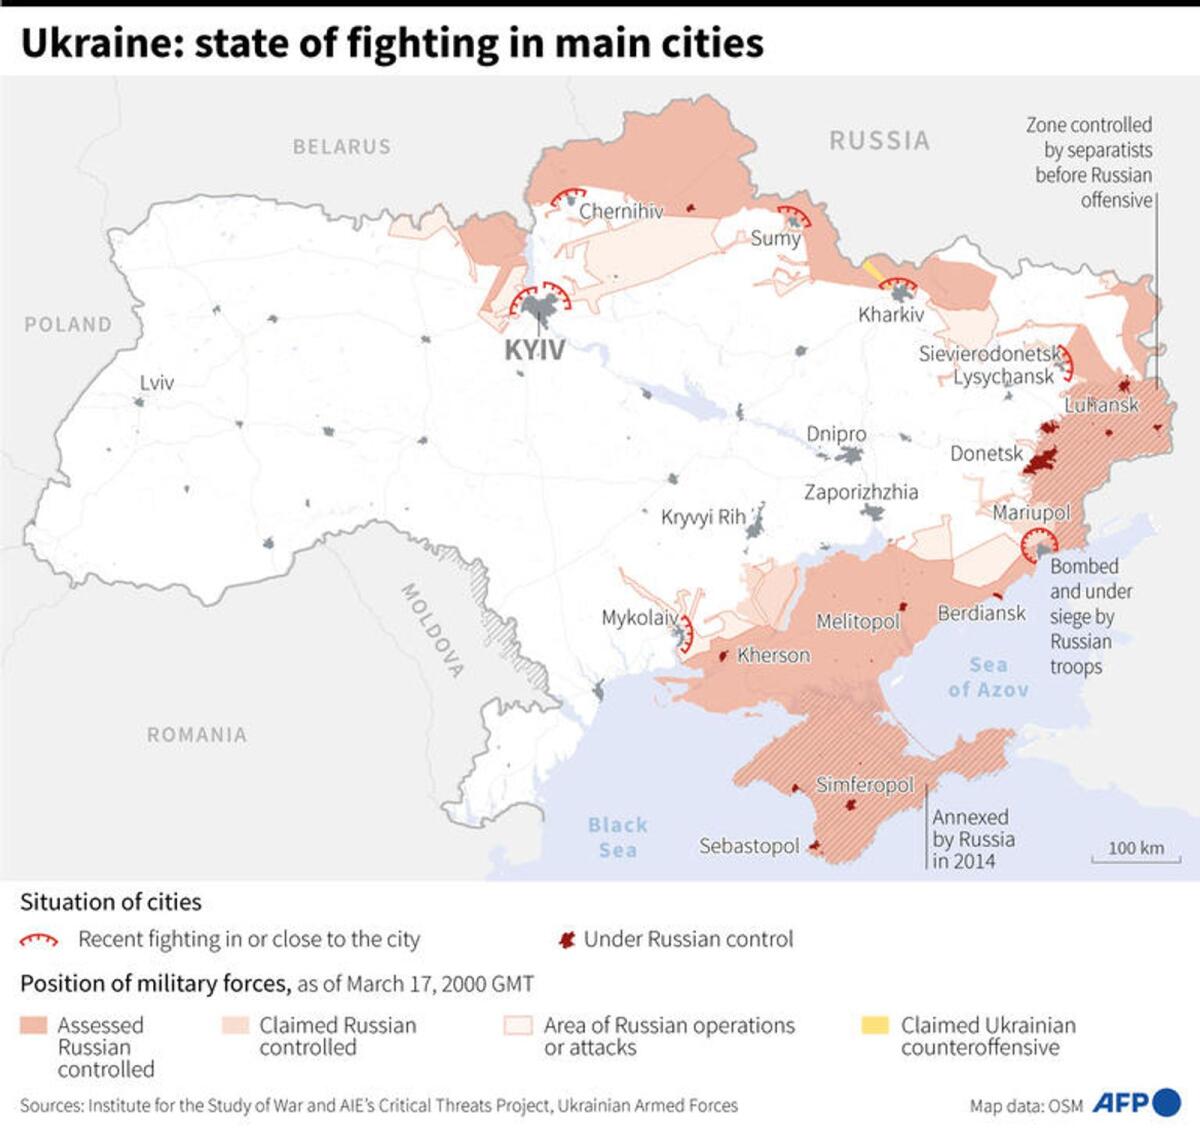 Map of Ukraine showing cities under attack or under Russian control - Photo: AFP